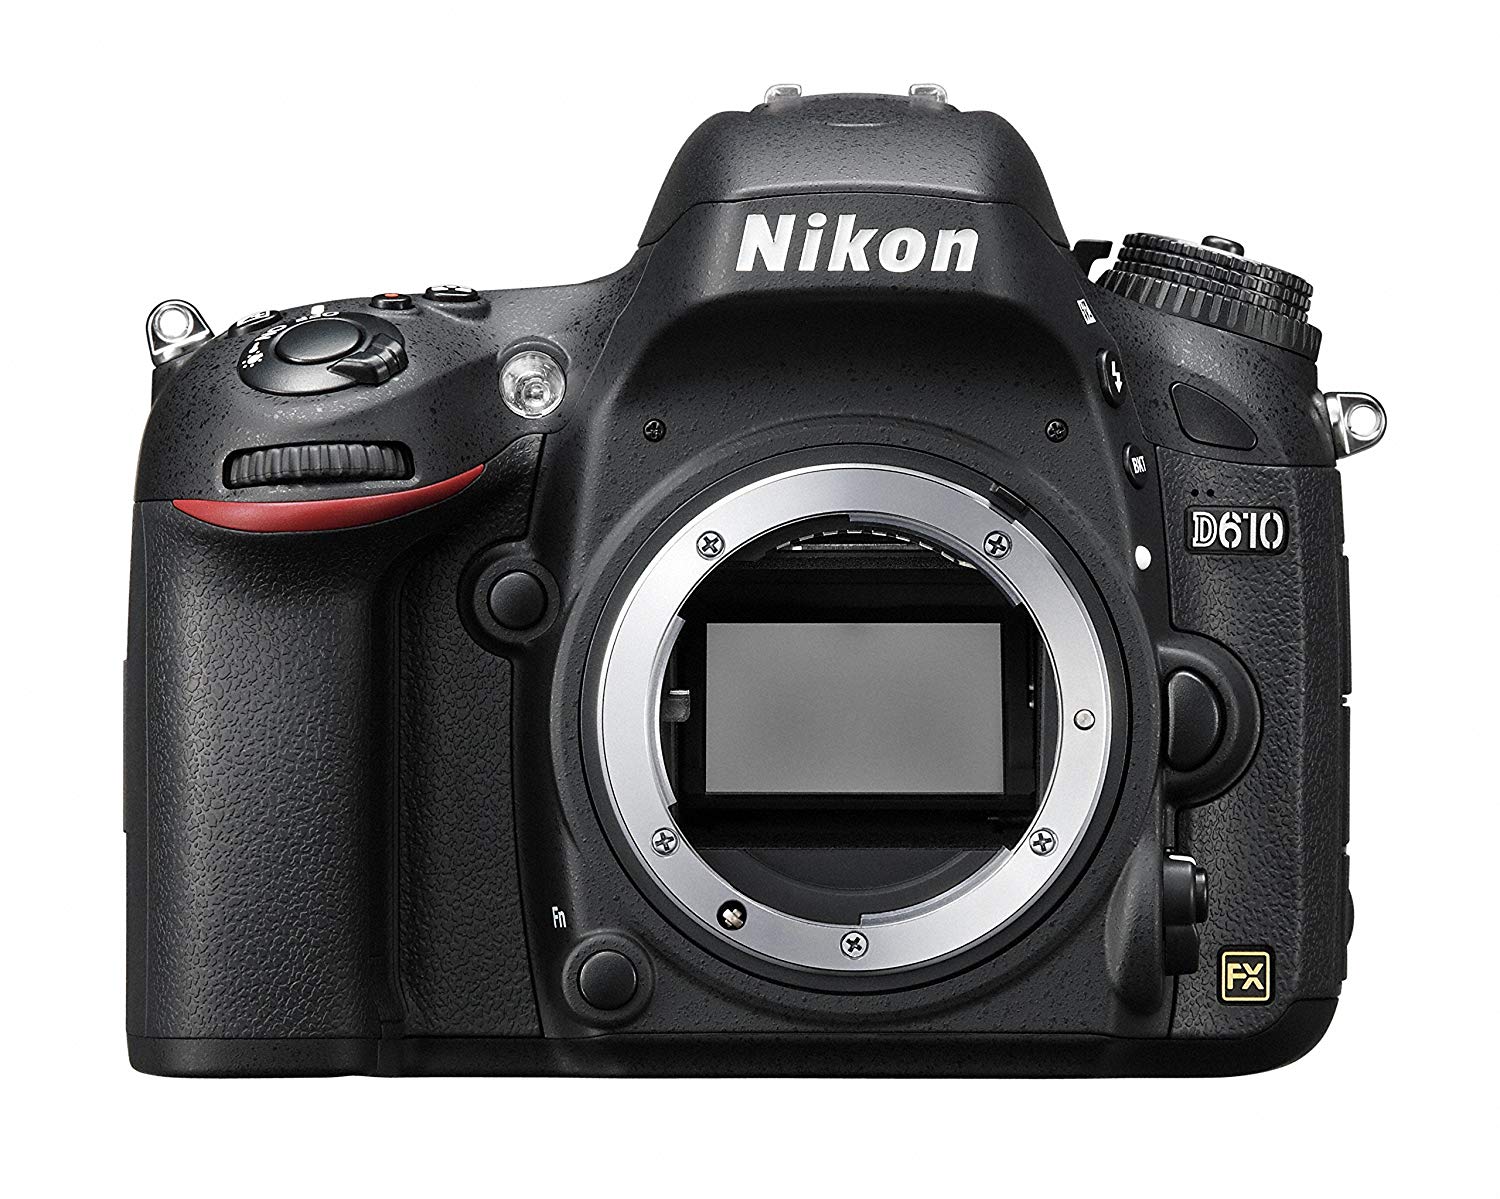 Nikon D610 front side without lens on.